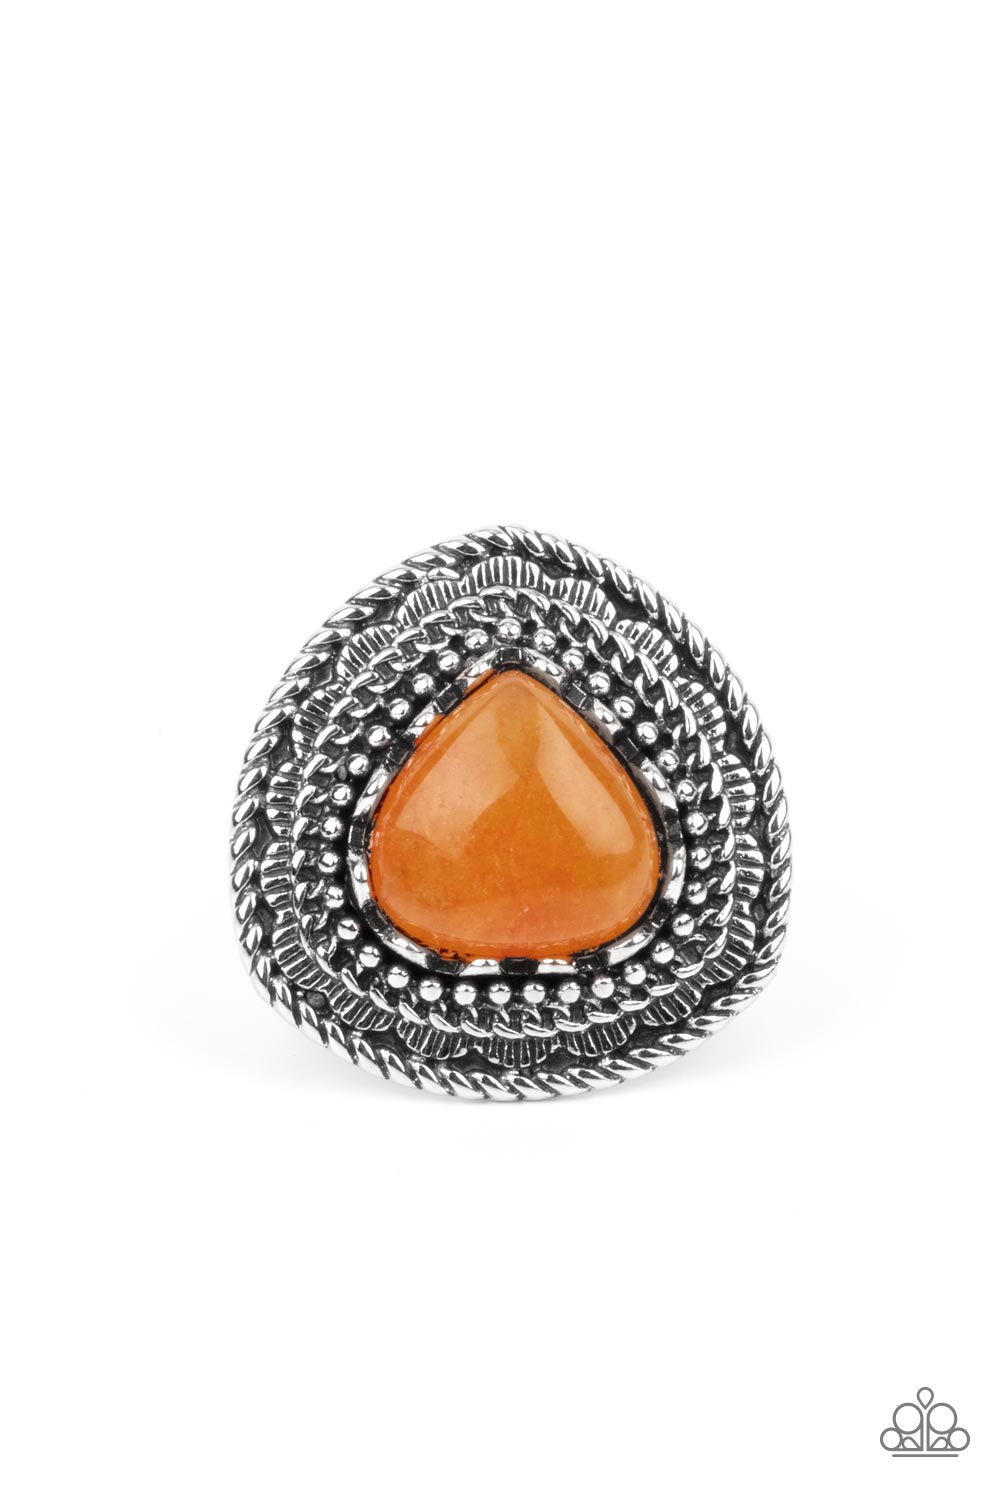 Genuinely Gemstone Orange Ring - Paparazzi Accessories  Layers of spun, studded, textured, and chain-like silver accents stack into an oversized ornate frame atop the finger. Chiseled into a tranquil teardrop, a refreshing orange stone adorns the center of the frame for a colorfully earthy finish. Features a stretchy band for a flexible fit.  Sold as one individual ring.